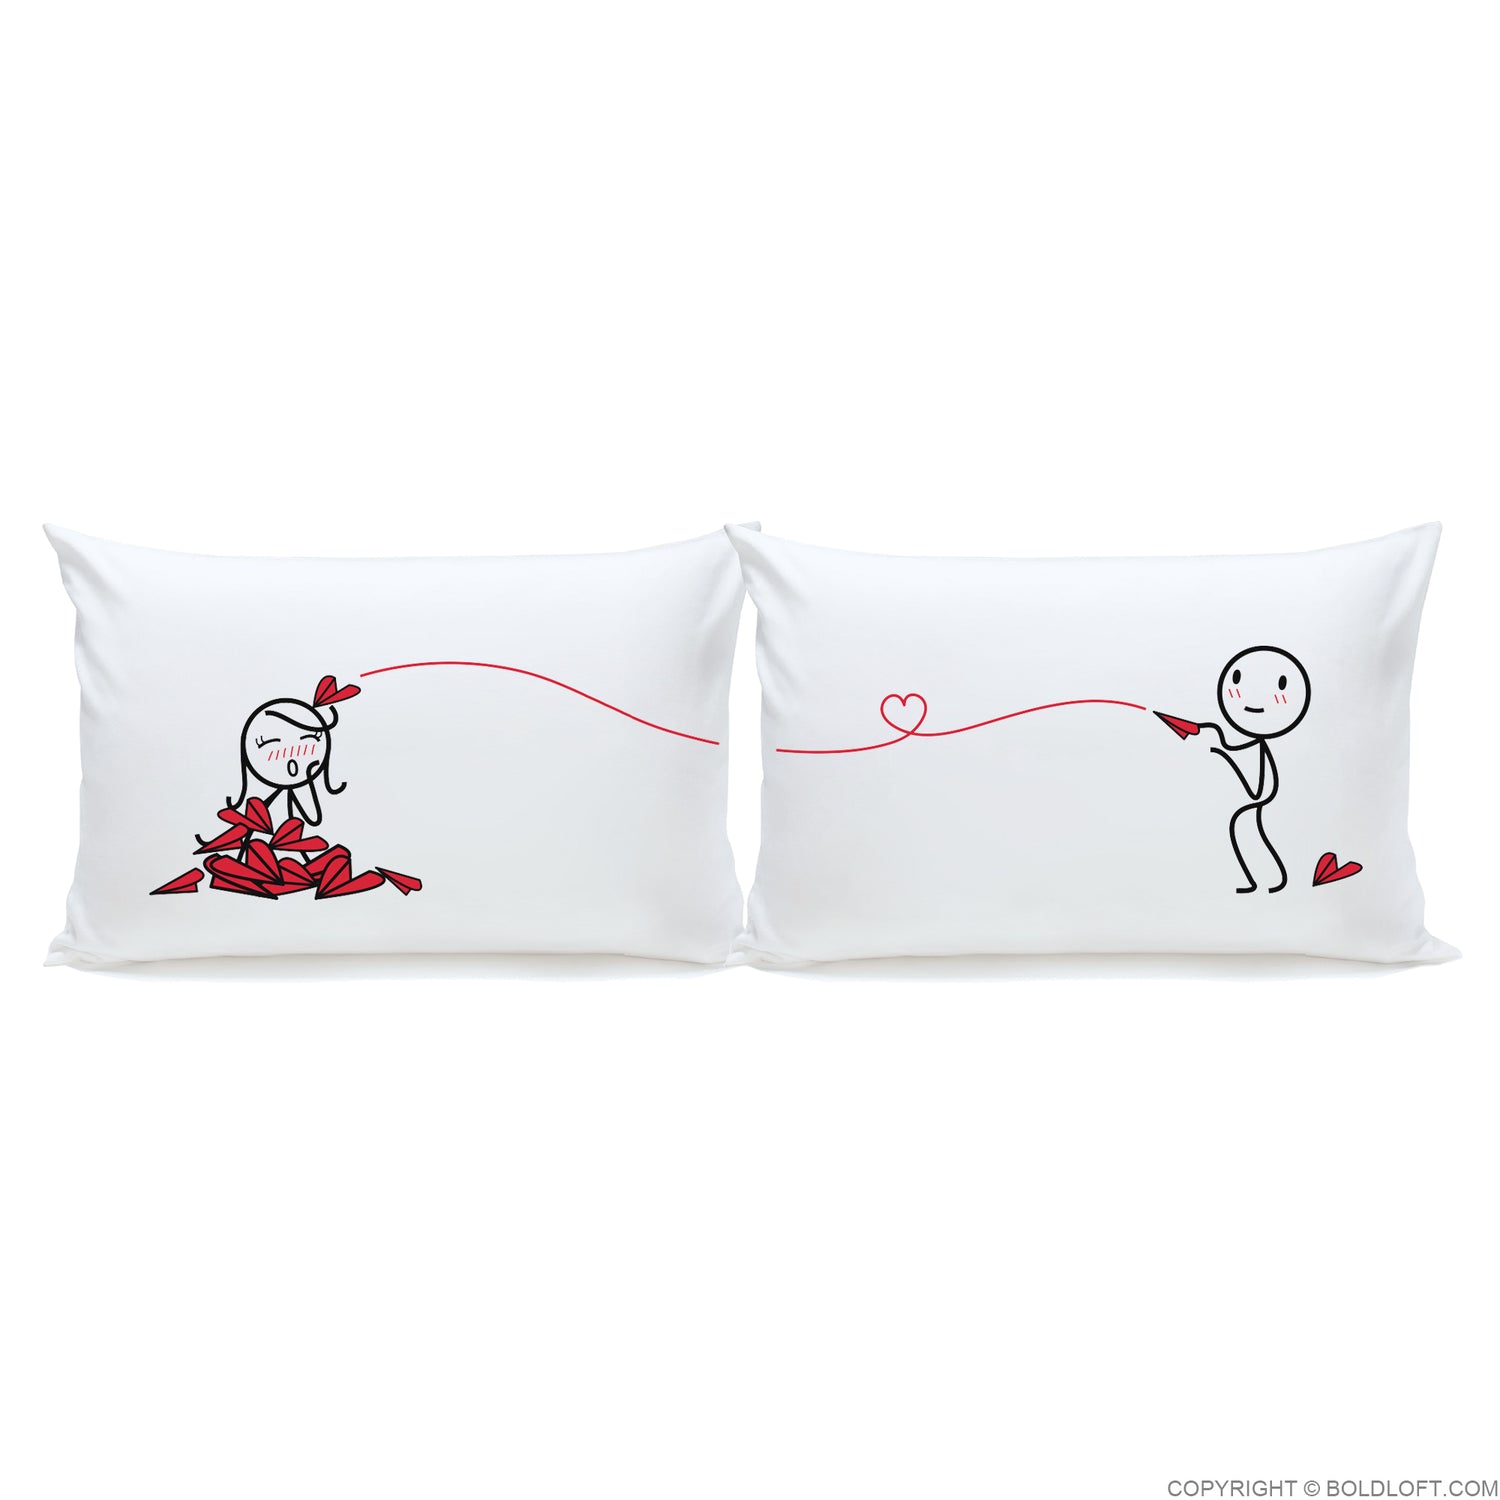 Love Will Find A Way ™ Couple Pillowcase Set